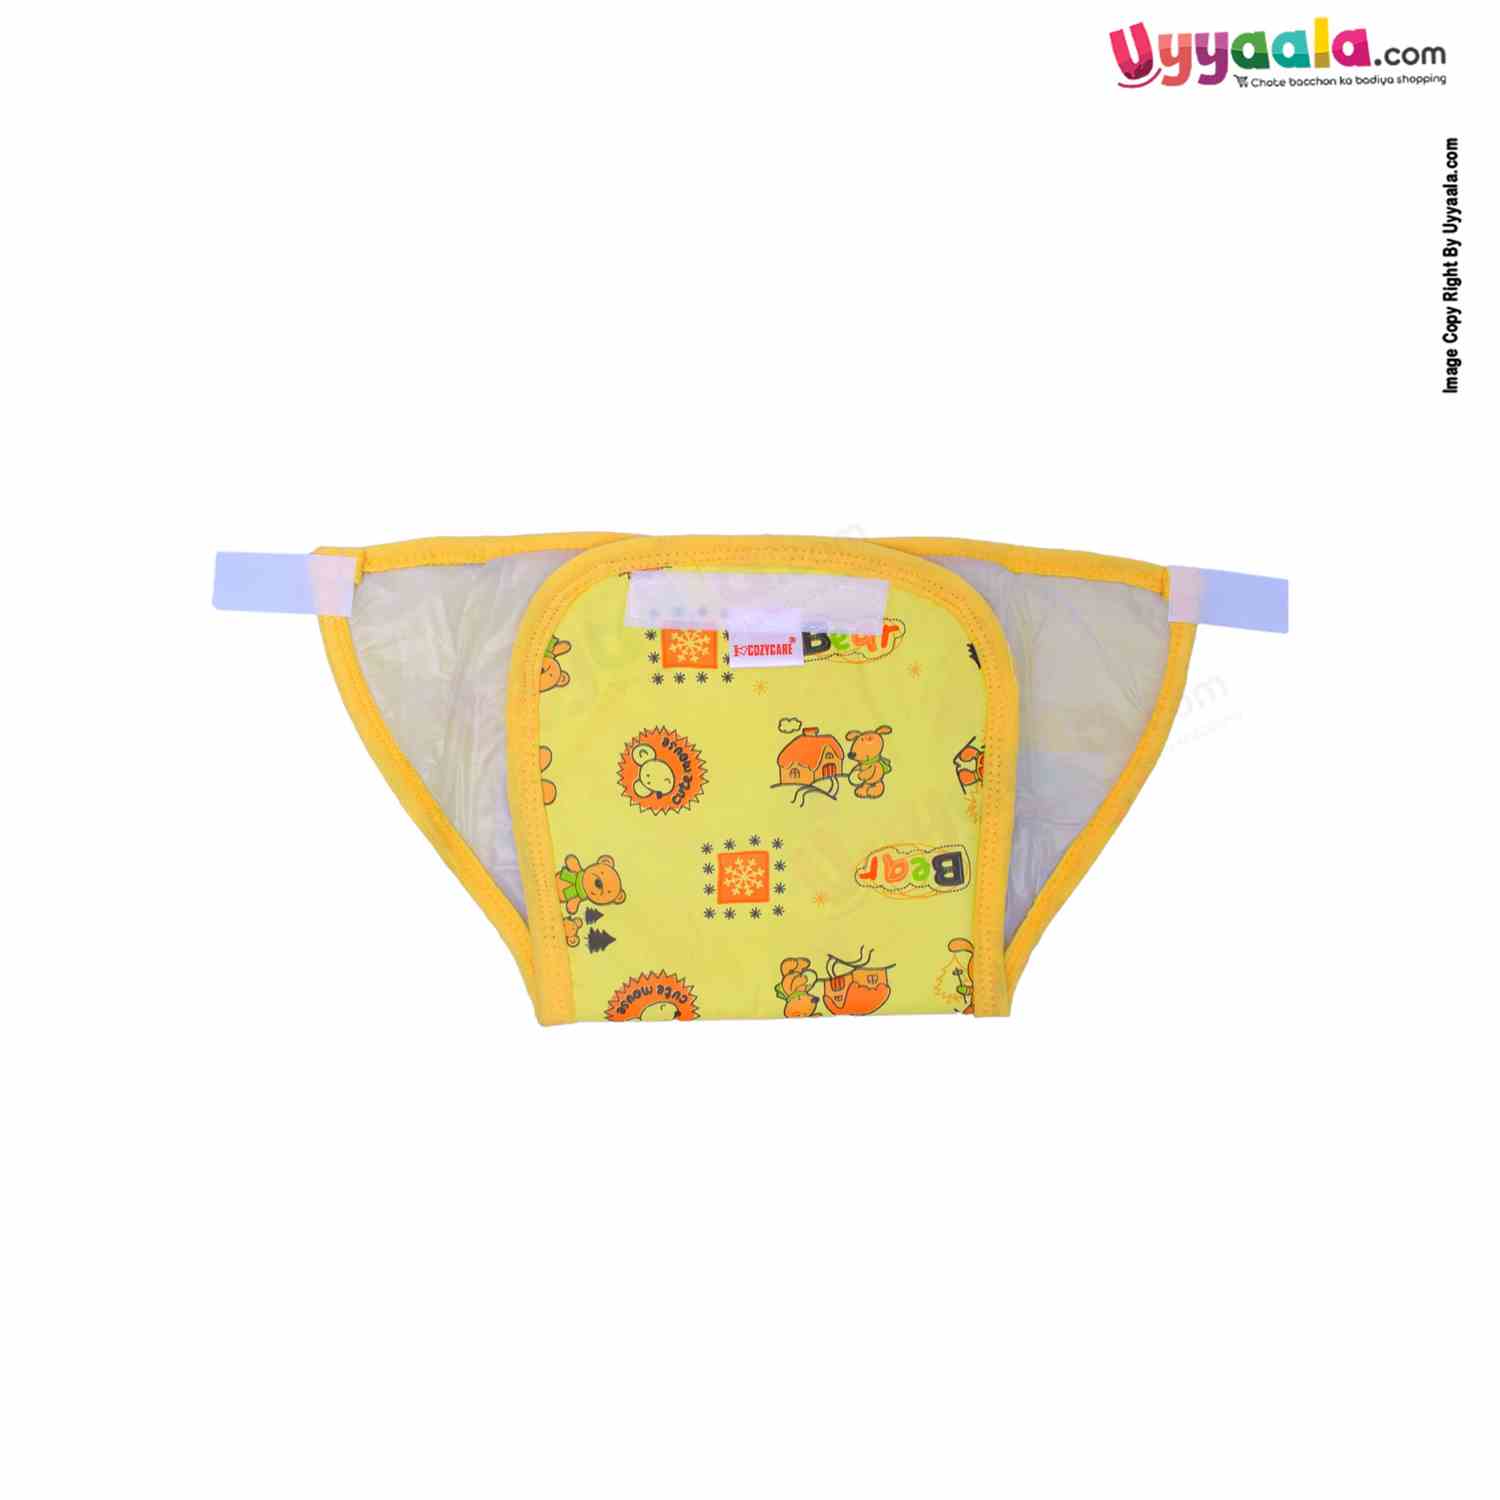 COZYCARE Washable Diapers Plastic, Velcro Bear Print Pink, Blue & Yellow without Pads- 3P Set (M)